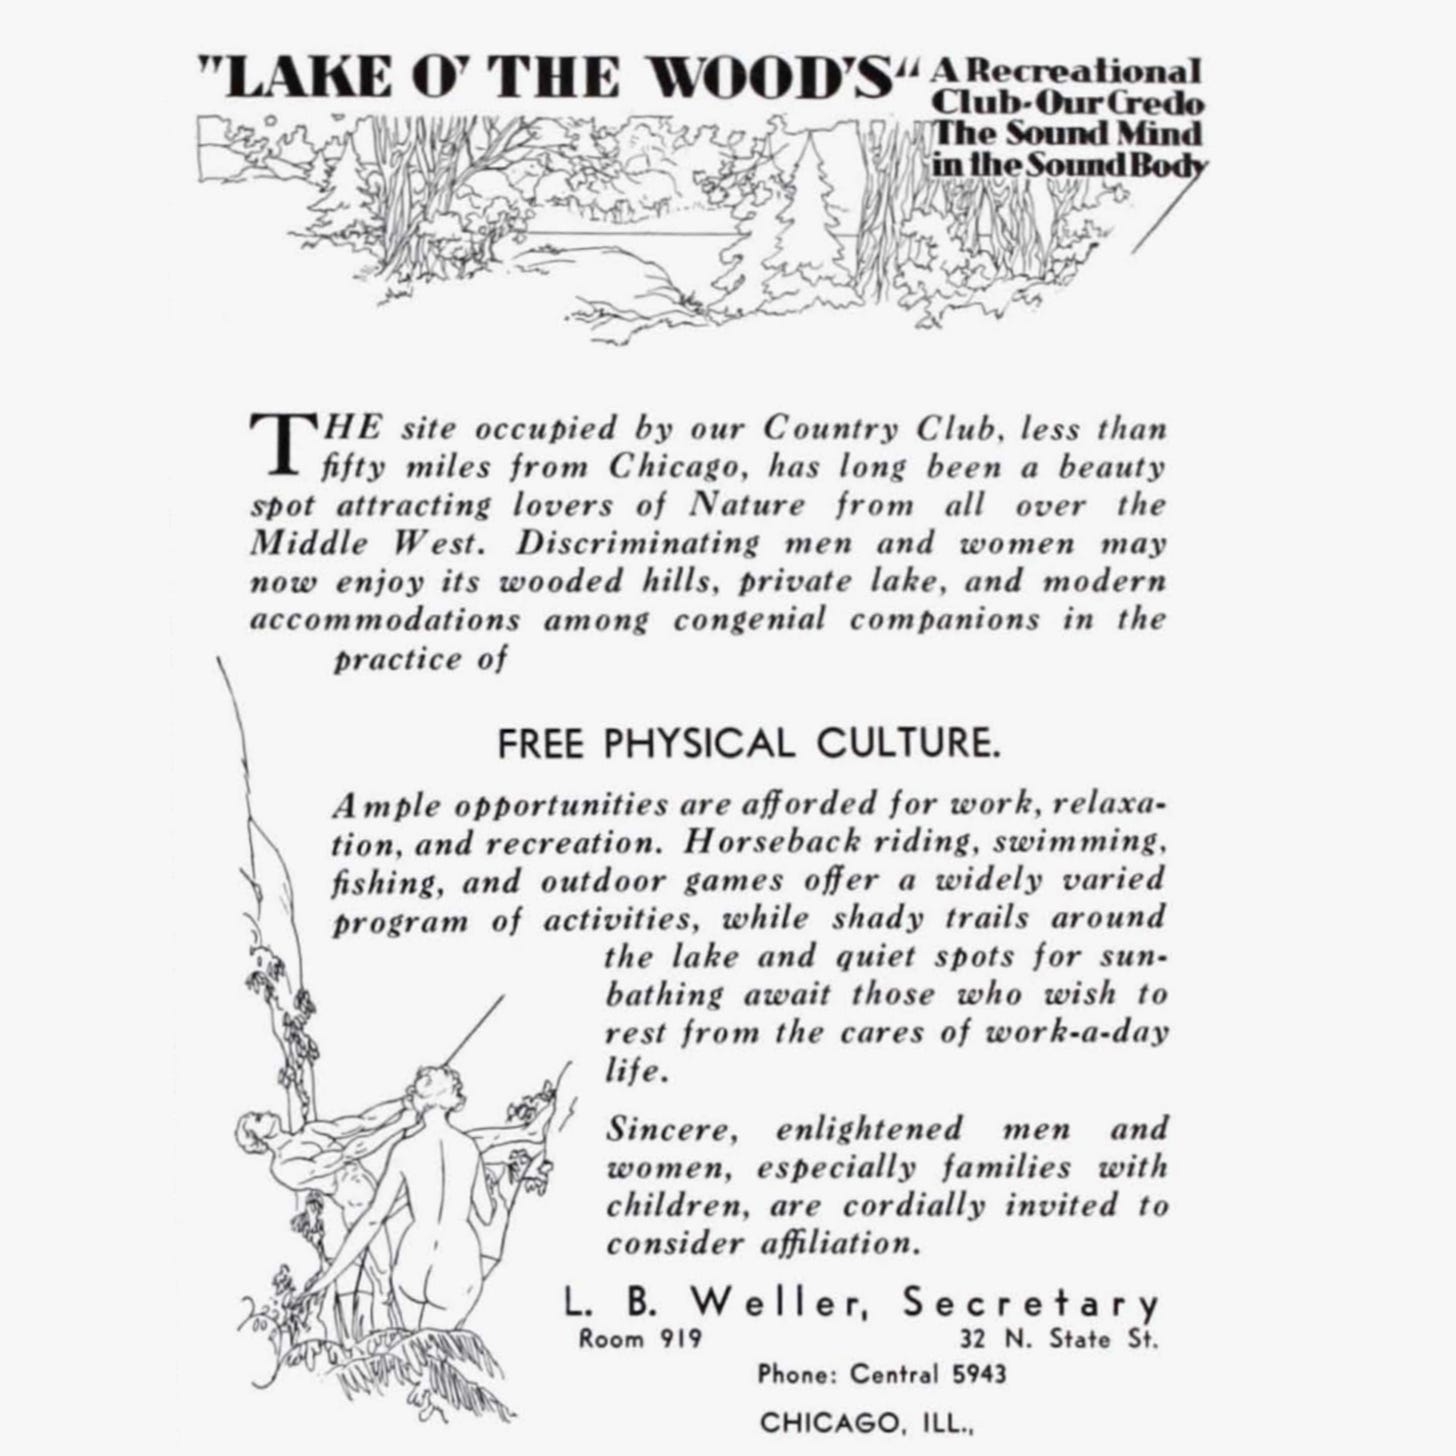 "LAKE O' THE WOODS” A Recreational Club - Our Credo: The Sound Mind in the Sound Body  THE site occupied by our Country Club, less than fifty miles from Chicago, has long been a beauty spot attracting lovers of Nature from all over the Middle West. Discriminating men and women may now enjoy its wooded hills, private lake, and modern accommodations among congenial companions in the practice of FREE PHYSICAL CULTURE.  Ample opportunities are afforded for work, relaxation, and recreation. Horseback riding, swimming, fishing, and outdoor games offer a widely varied program of activities, while shady trails around the lake and quiet spots for sunbathing await those who wish to rest from the cares of work-a-day life.  Sincere, enlightened men and women, especially families with children, are cordially invited to consider affiliation.  L. B. Weller, Secretary